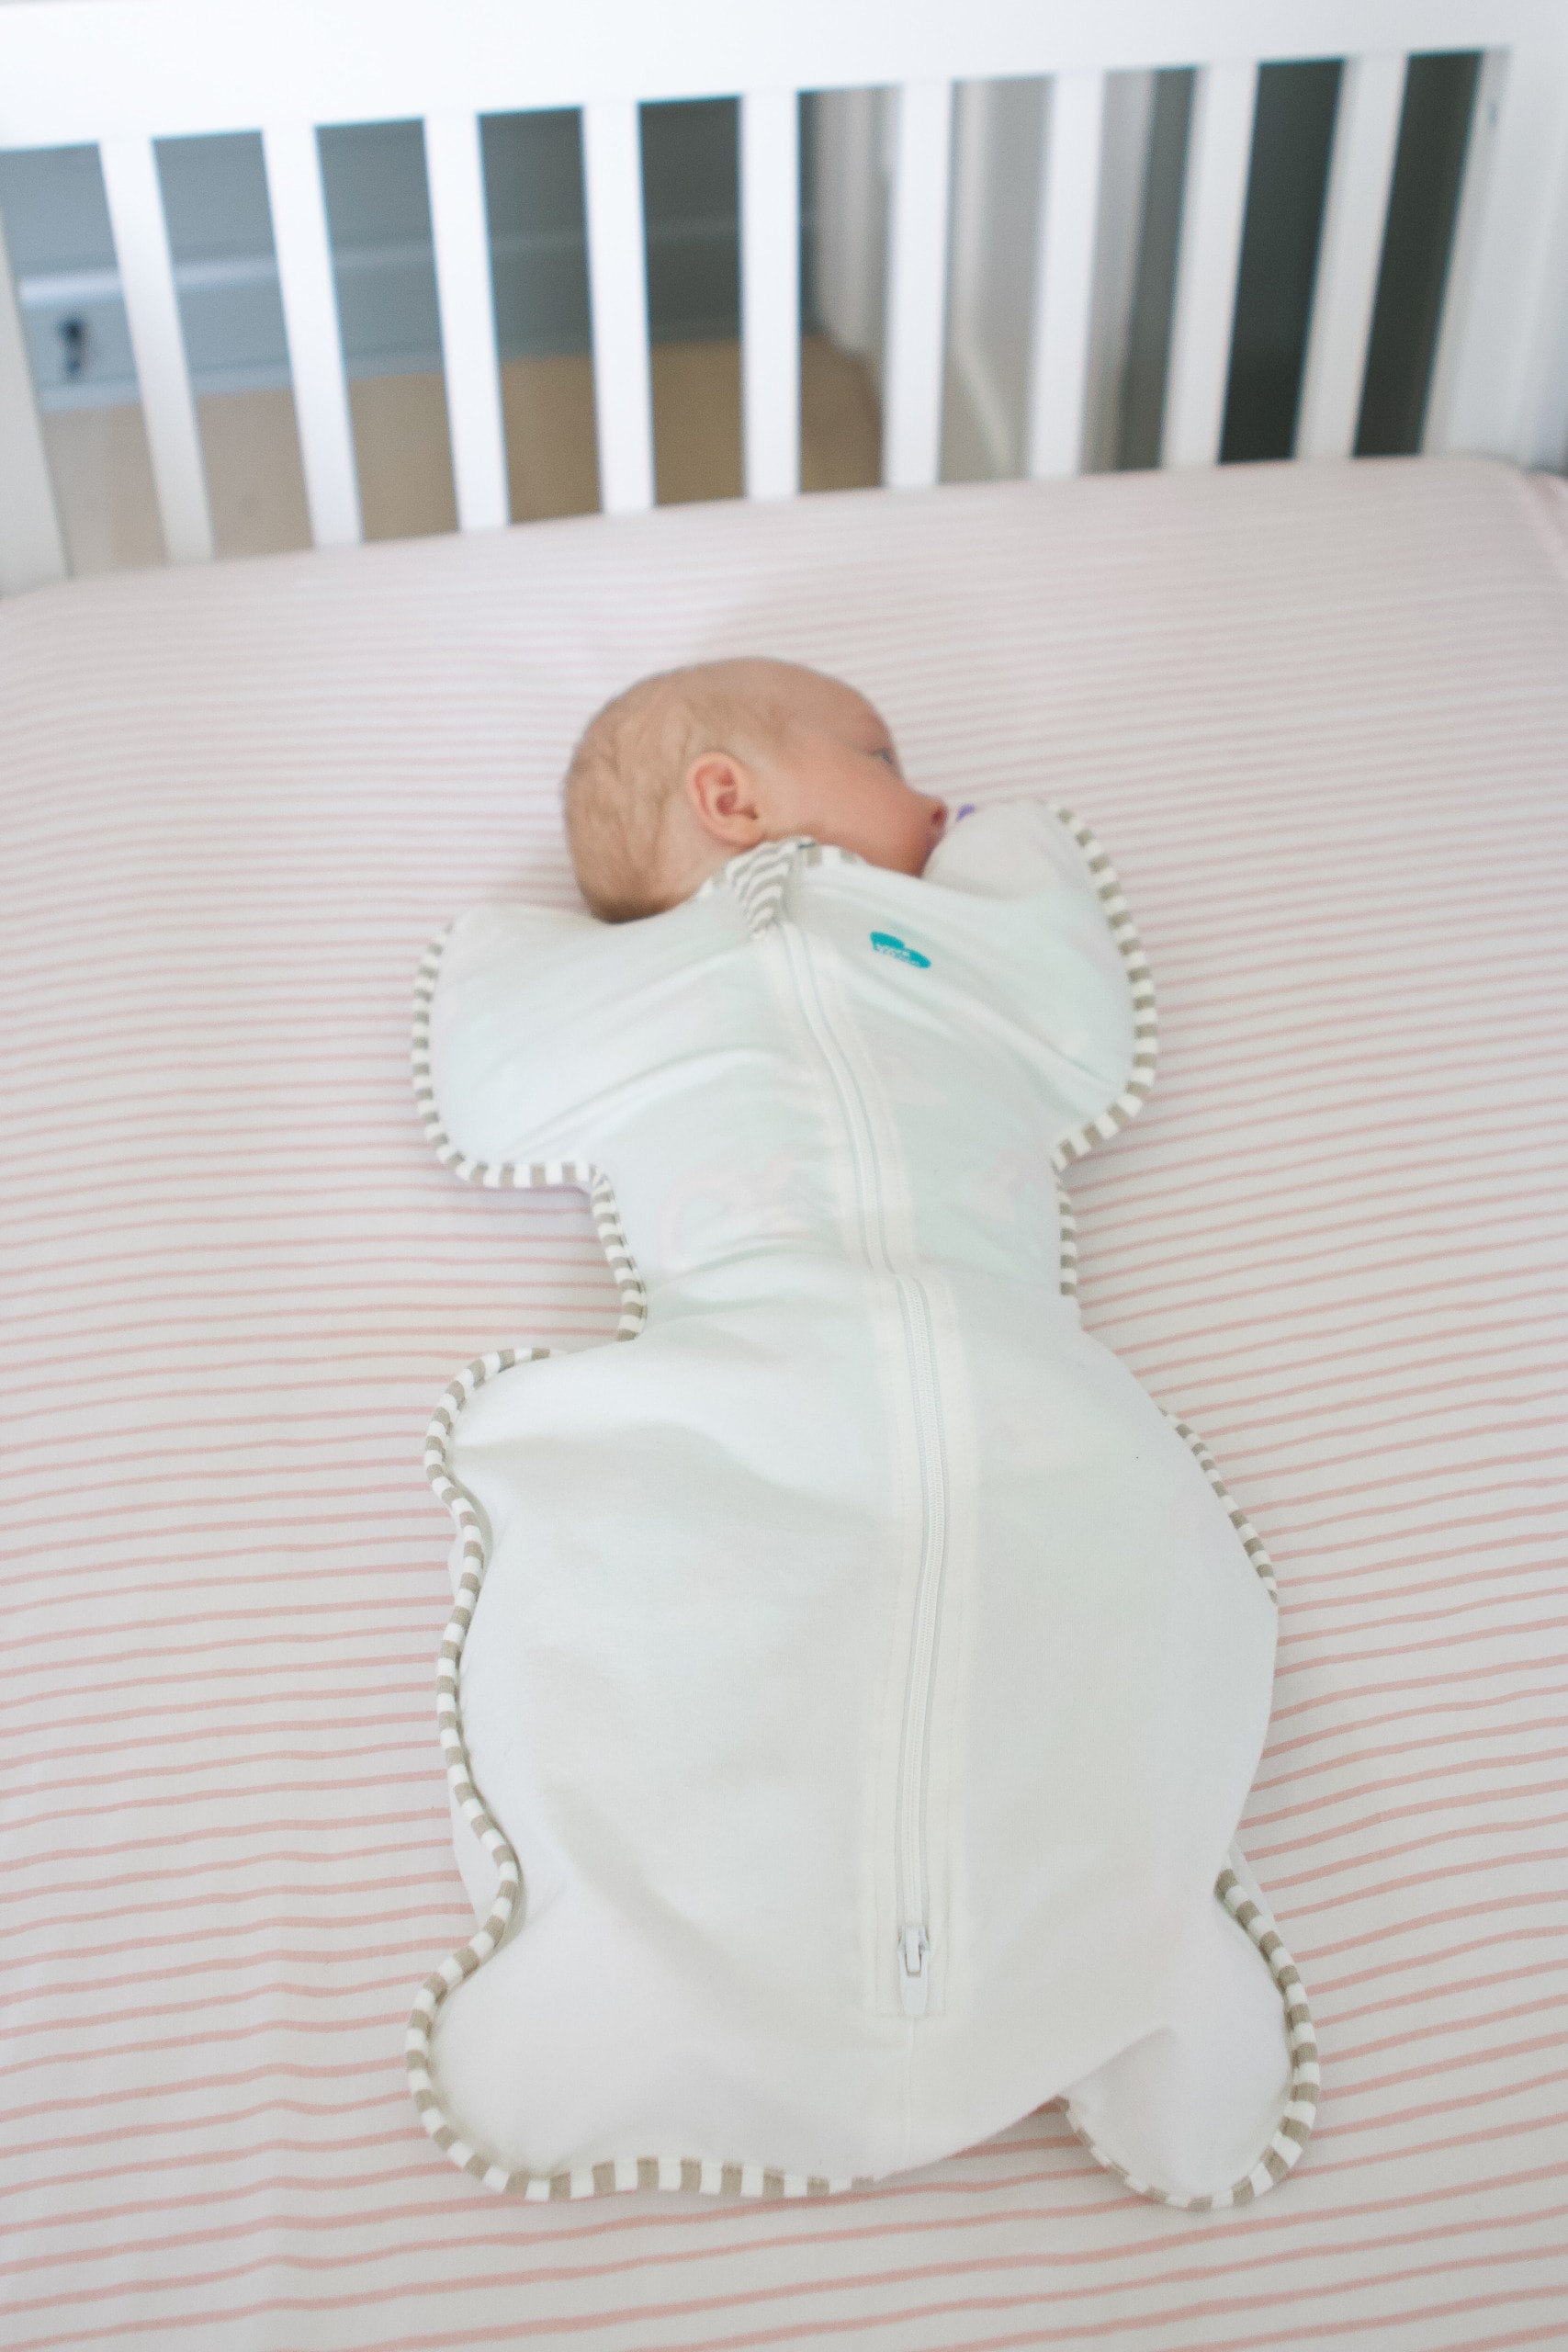 Rory in her swaddle